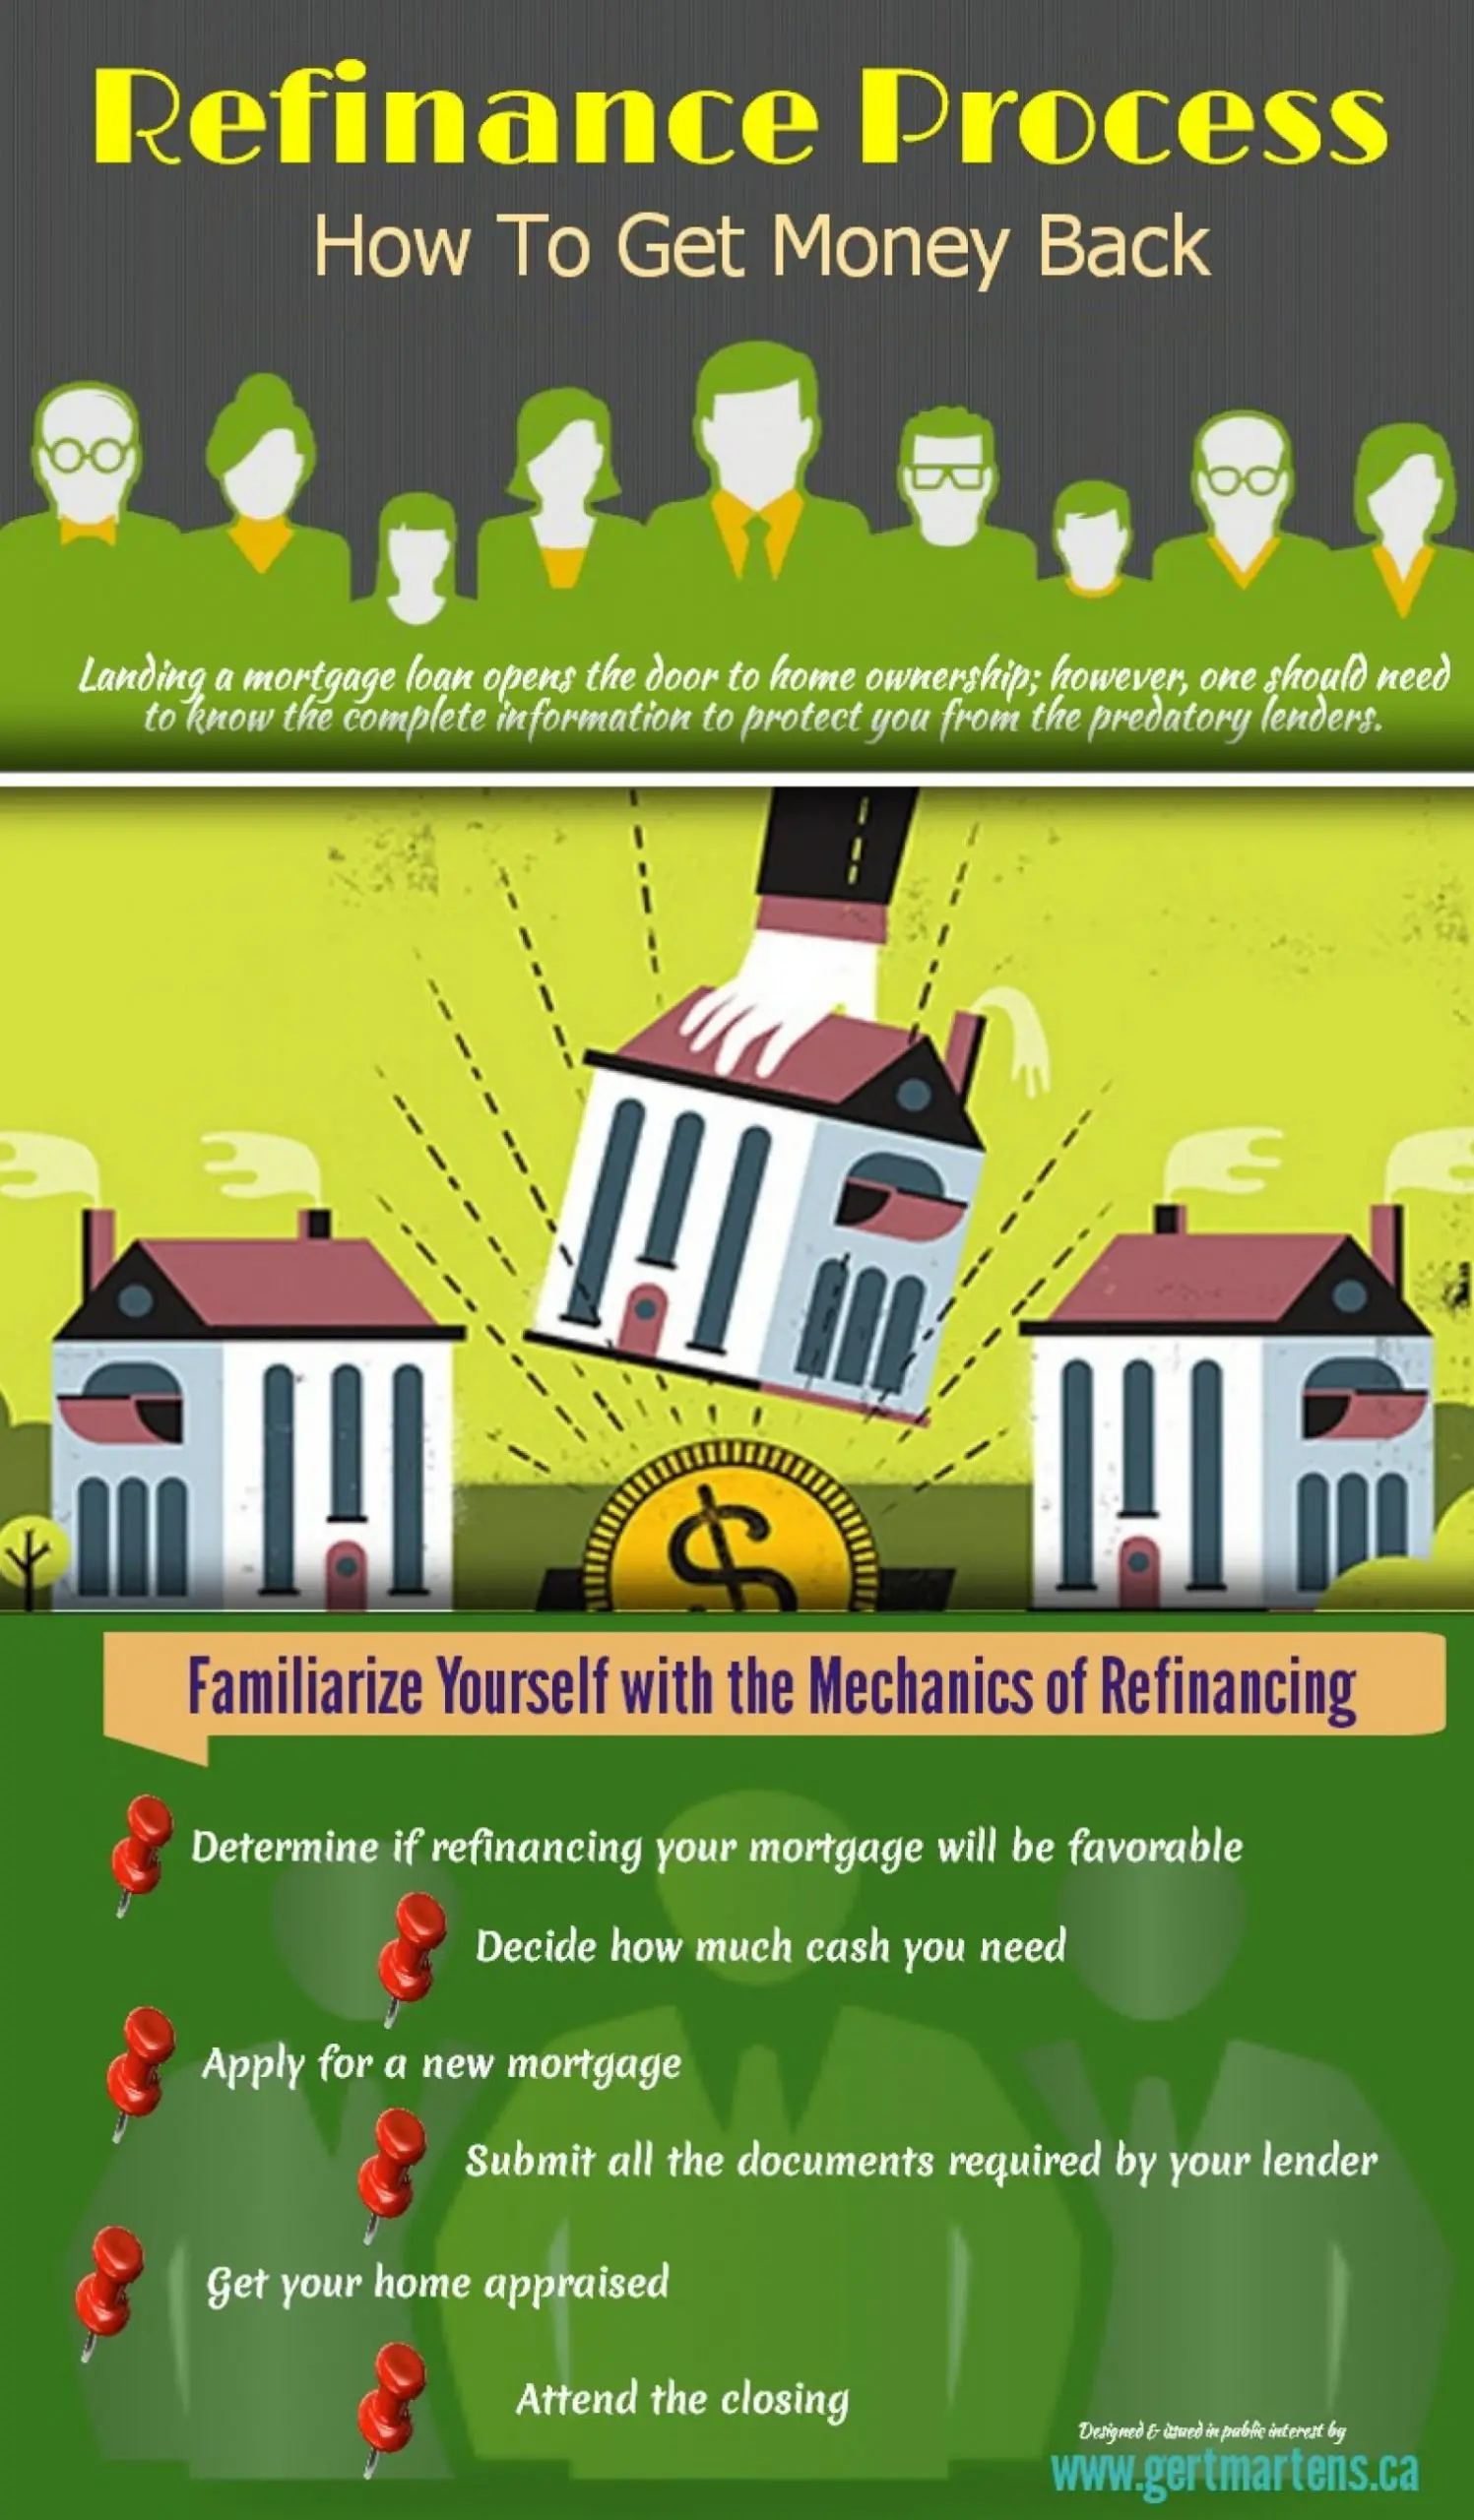 Refinance Process: How to Get Money Back